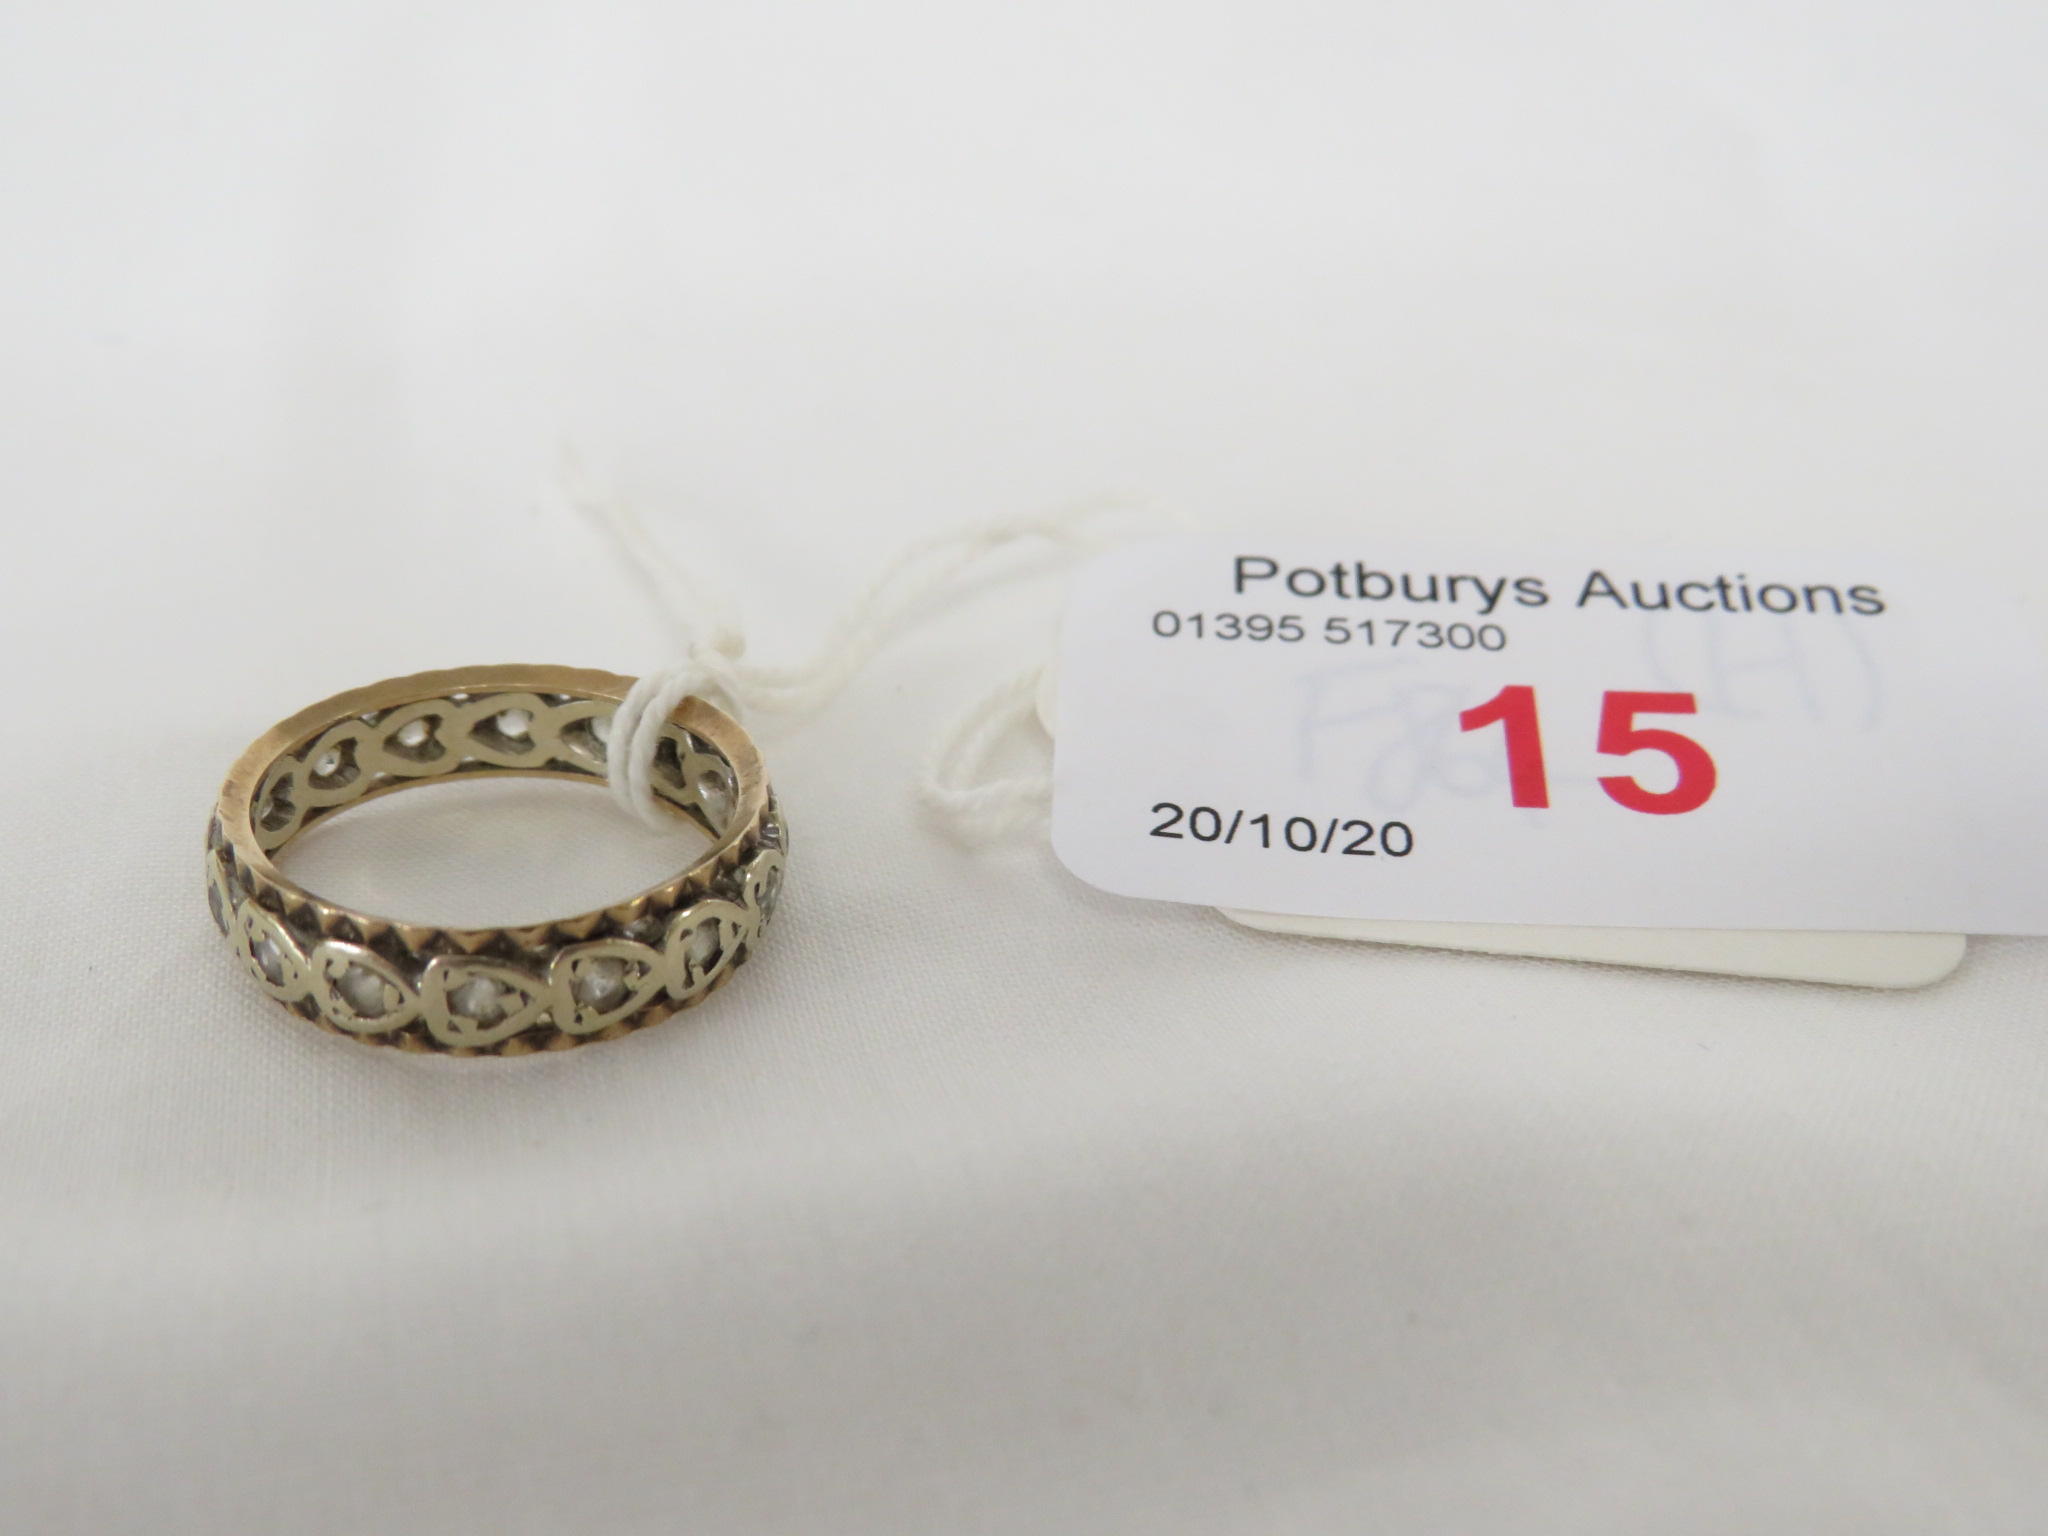 9 CARAT GOLD RING WITH LINK DECORATION AND SET WITH VERY SMALL WHITE STONES, STAMPED 375, 2.9G, WITH